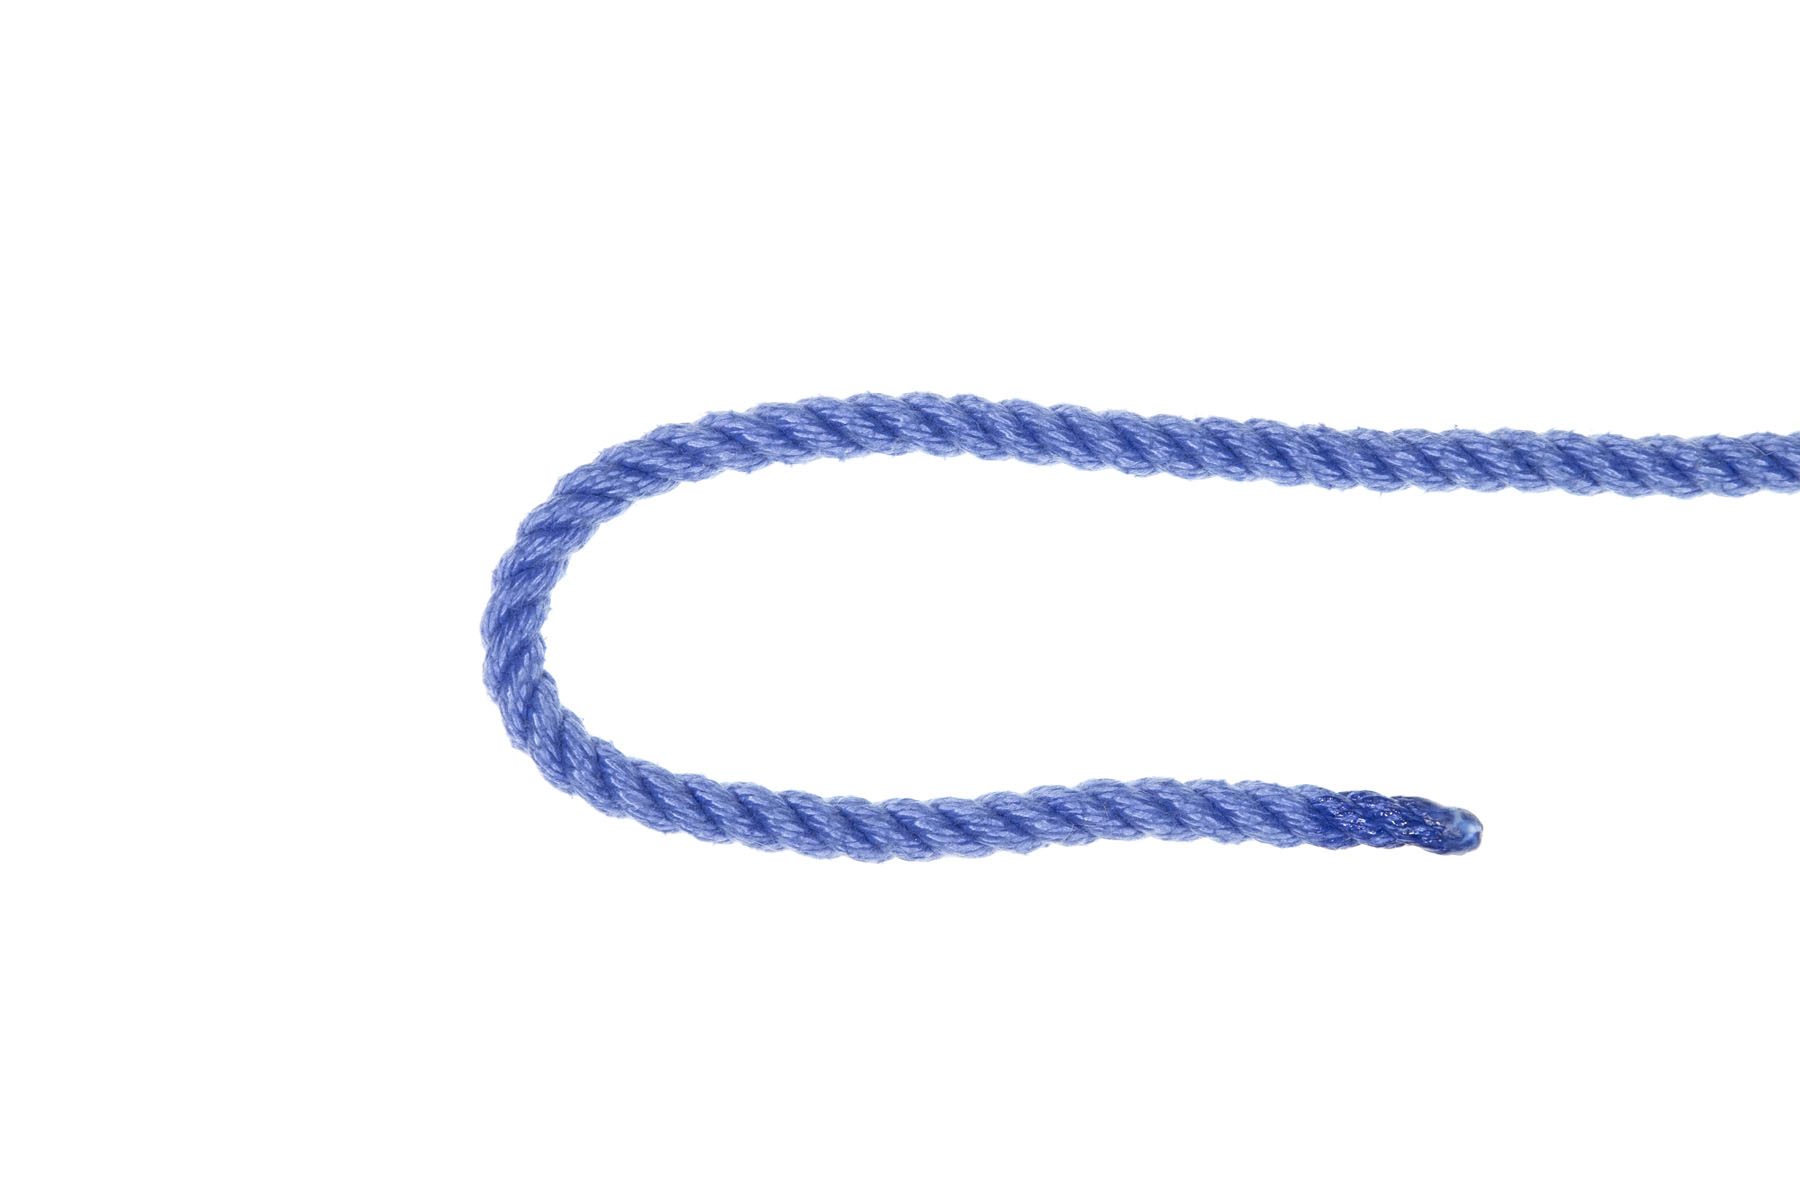 A single blue rope enters from the left, slightly above the middle of the frame. It runs to the right, then curves around to the right, doubling back the way it came. The rope doesn’t quite reach the left side of the image.